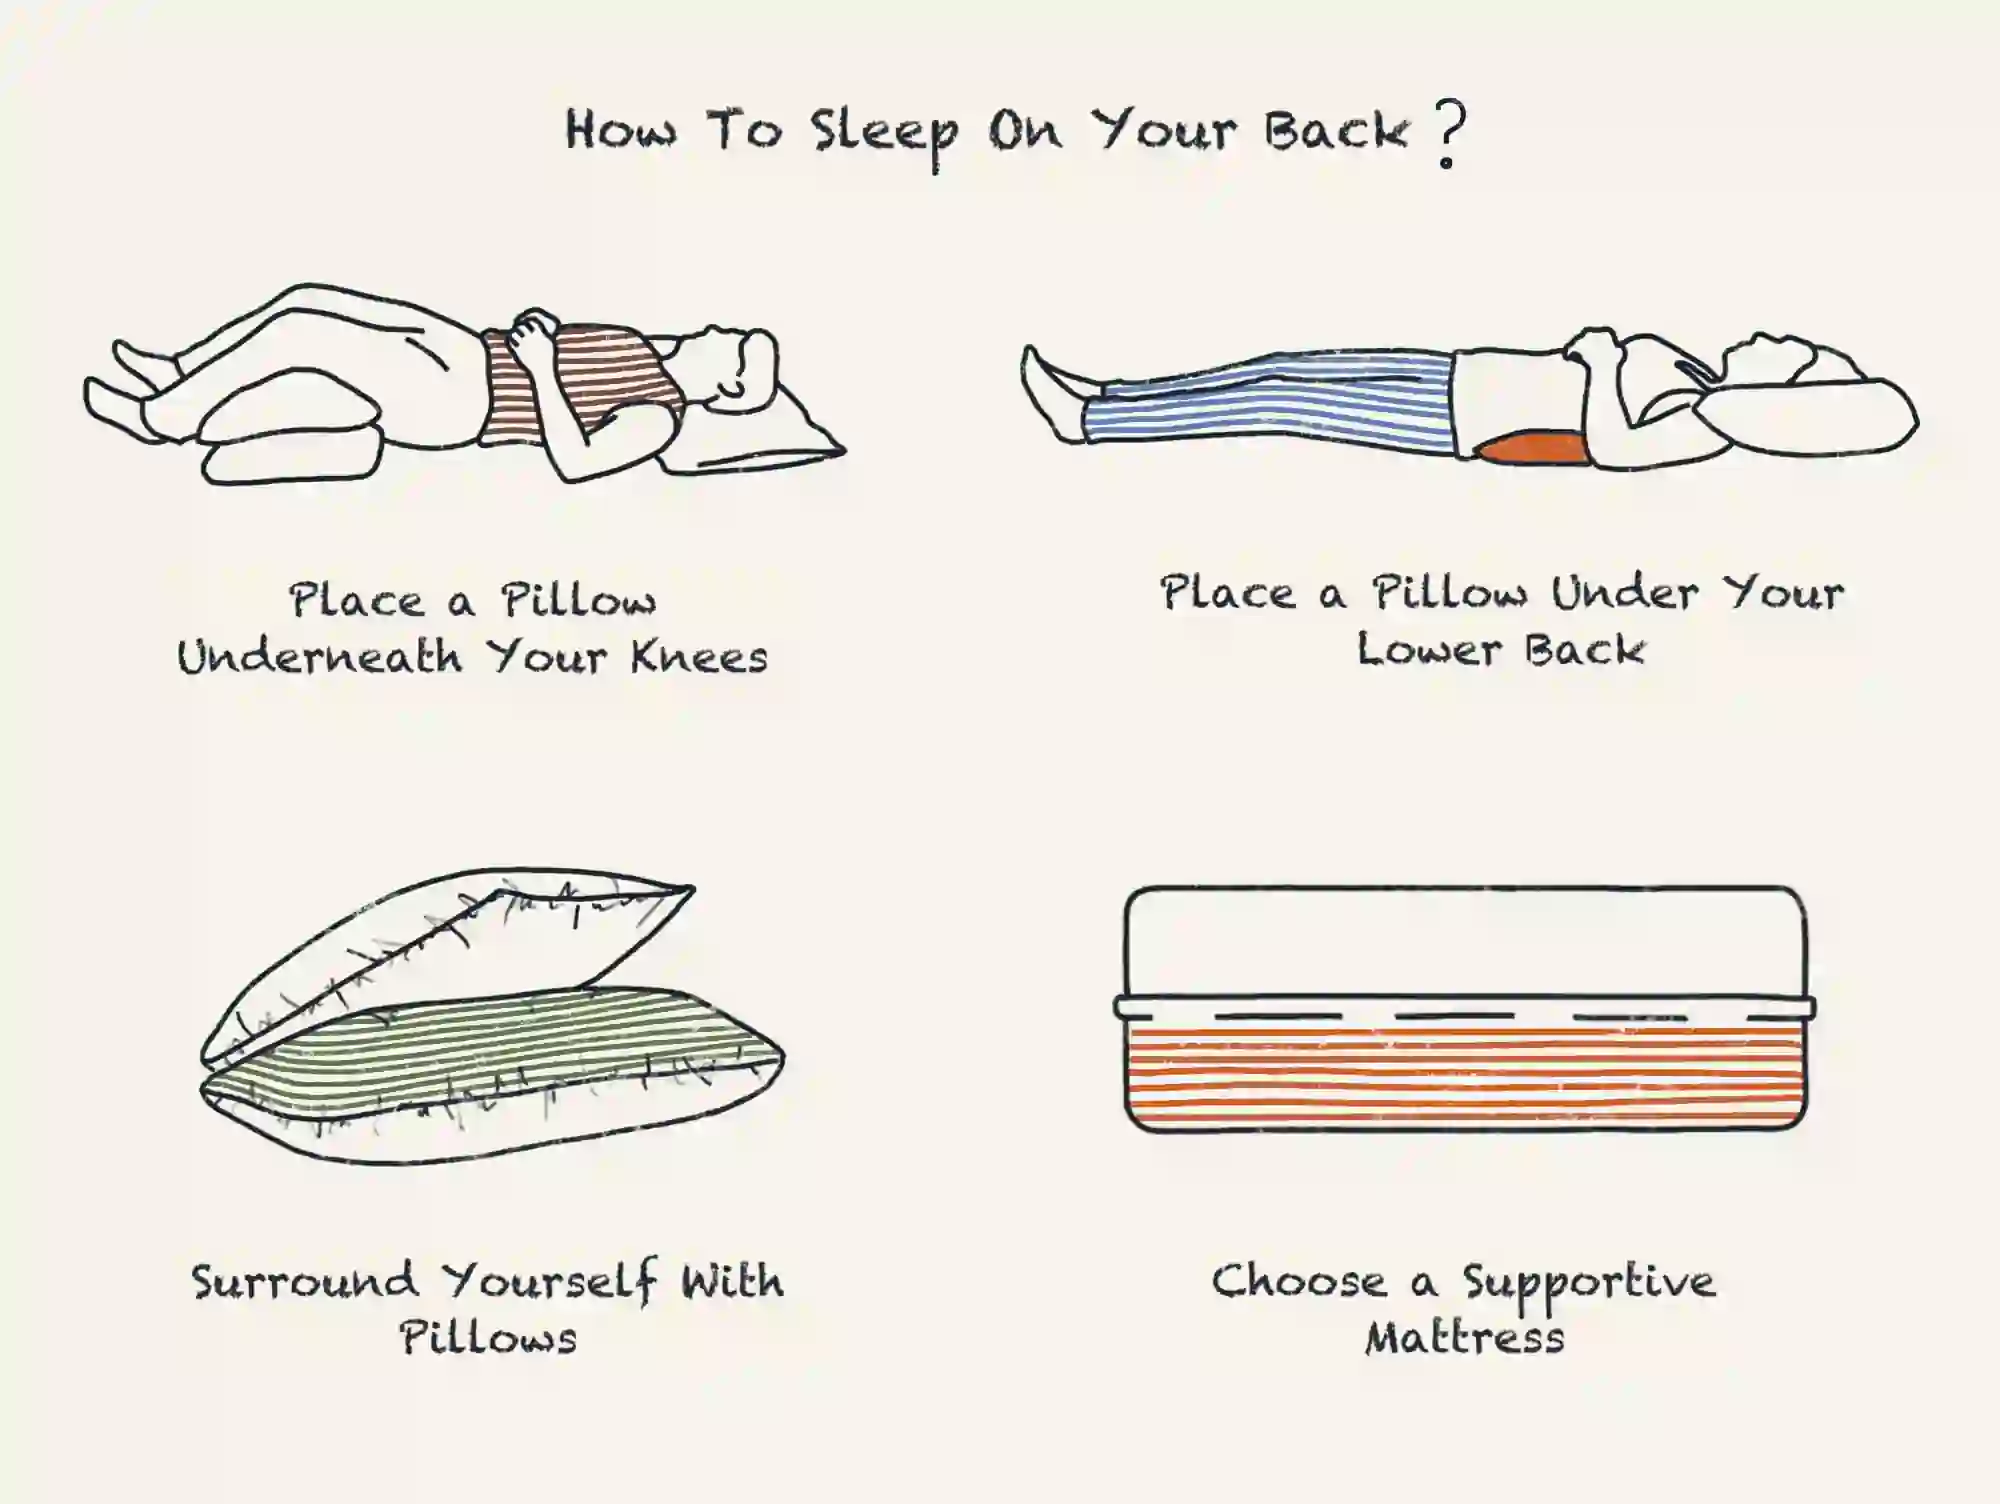 HOW TO SLEEP ON YOUR BACK - BACK SLEEPER PILLOW 